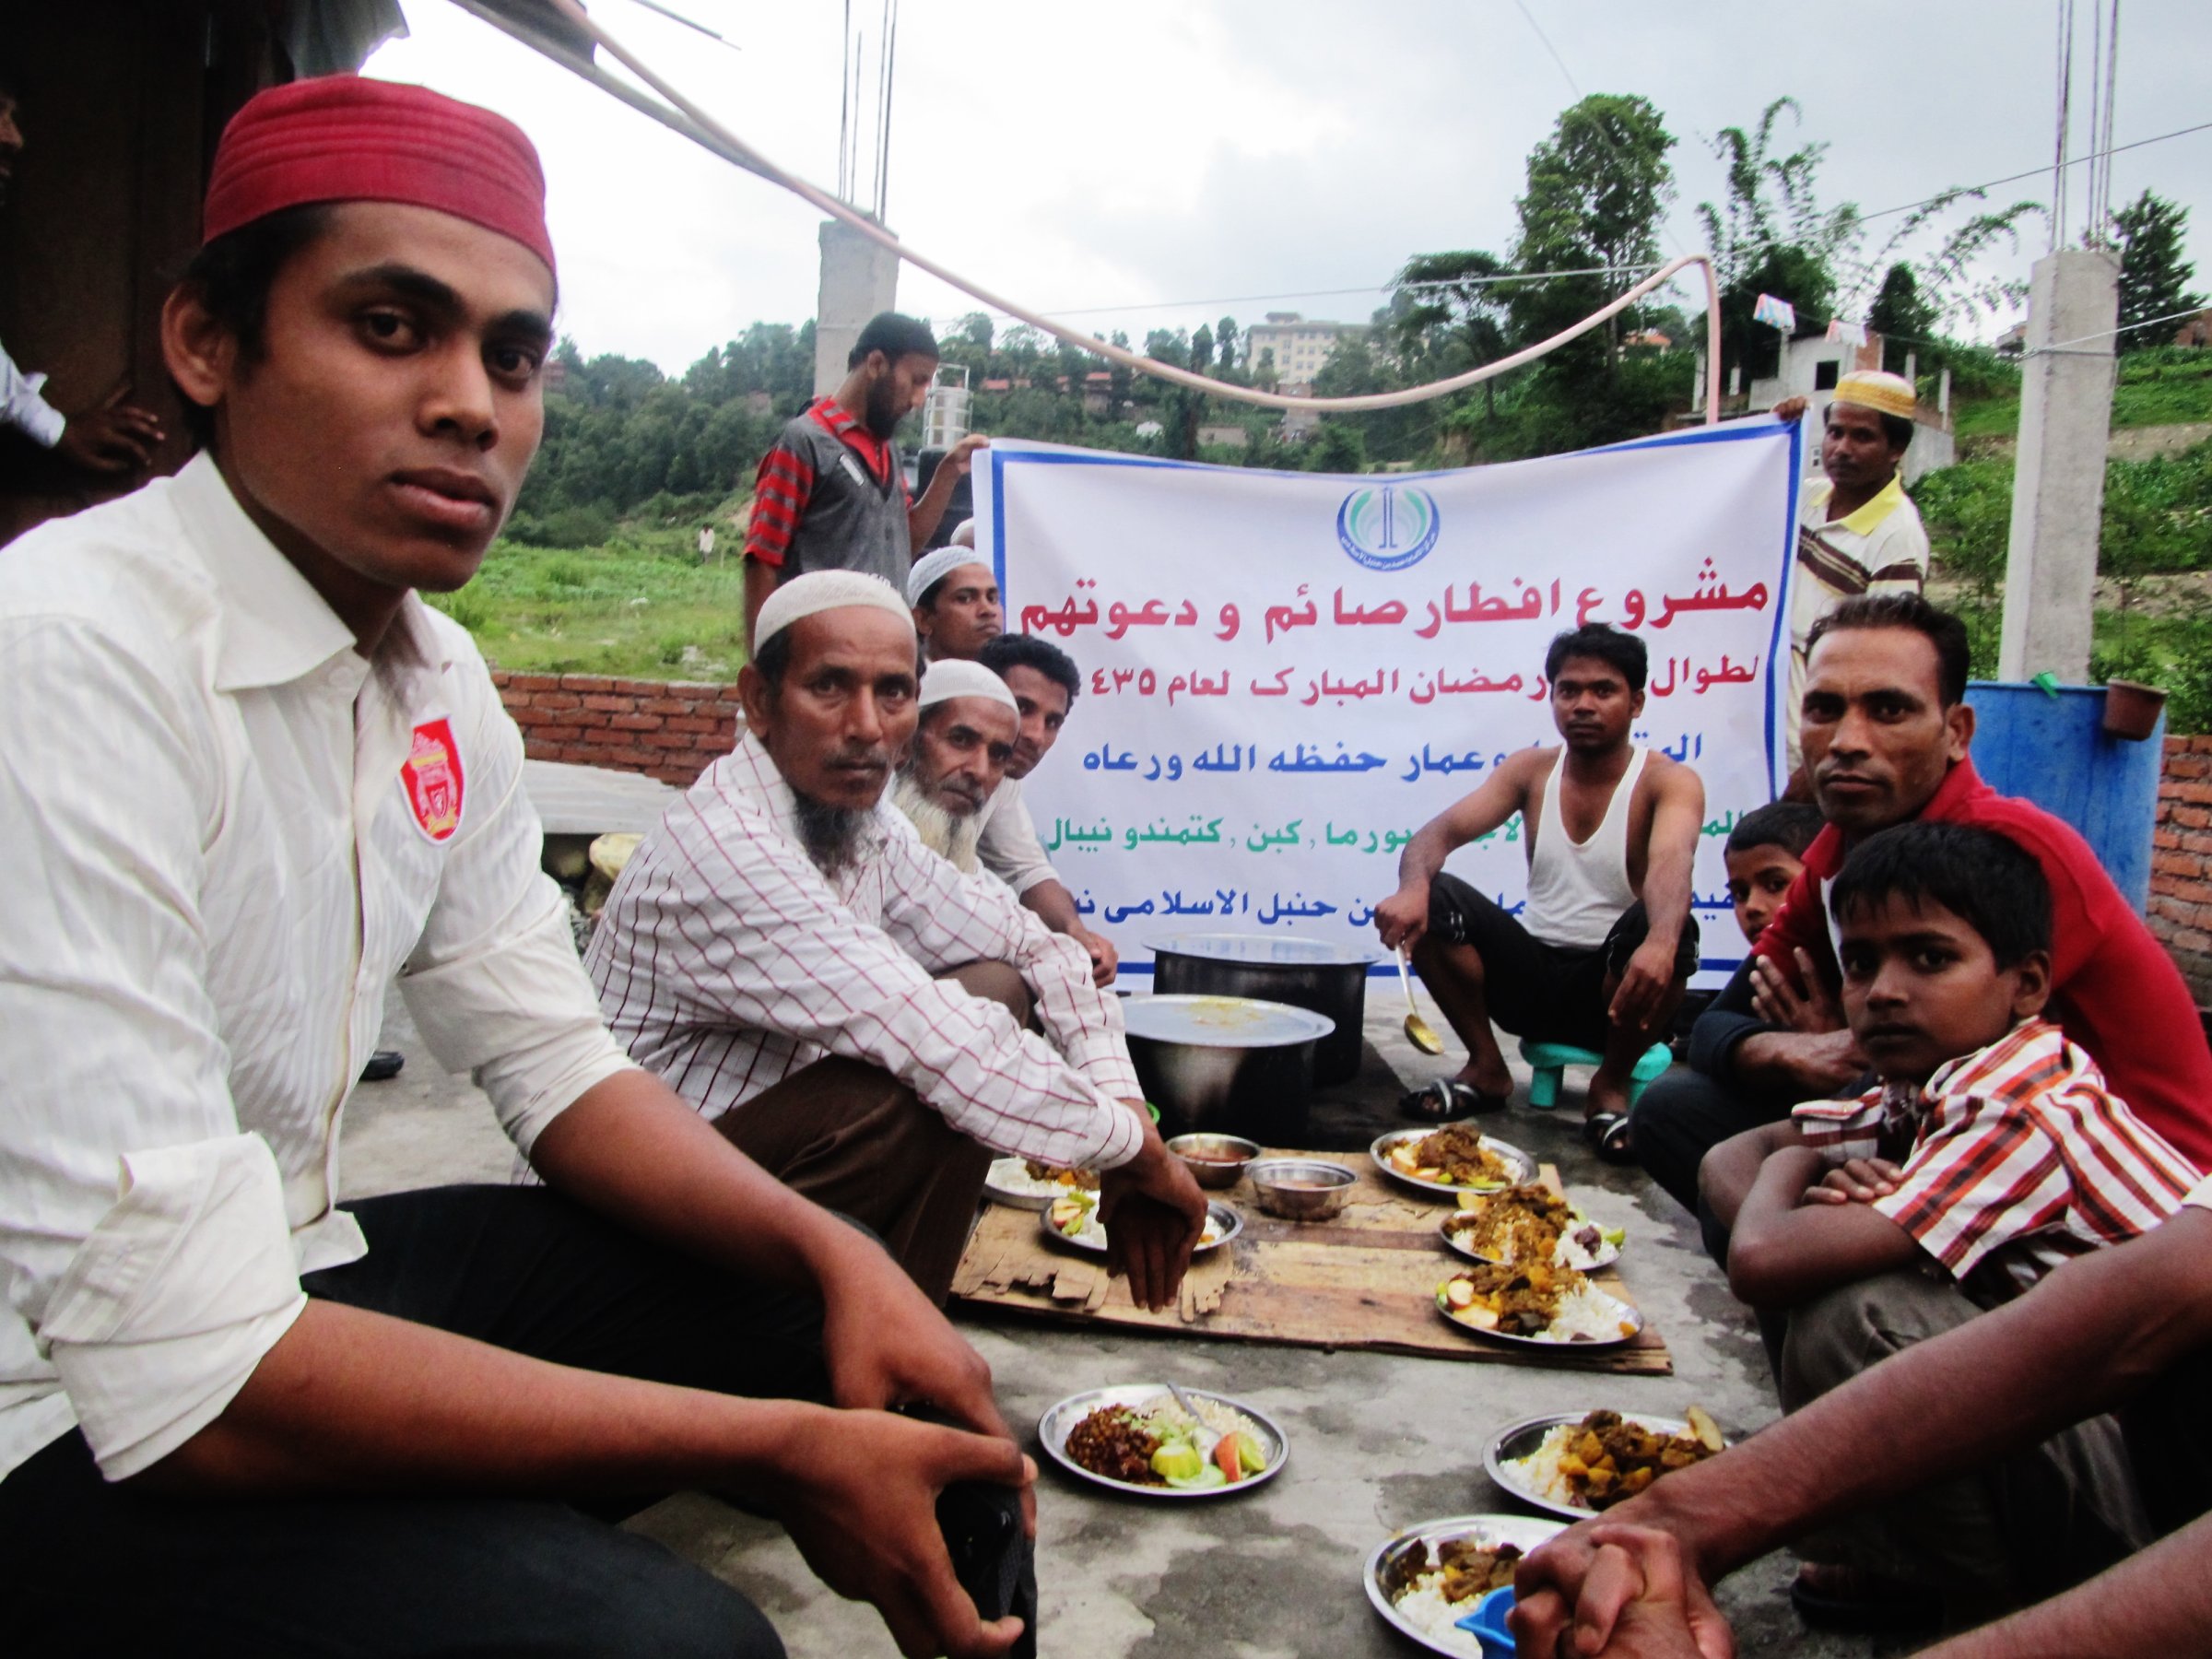 Hassan Hassan, left, and other Rohingya refugees on the outskirts of Kathmandu, Nepal